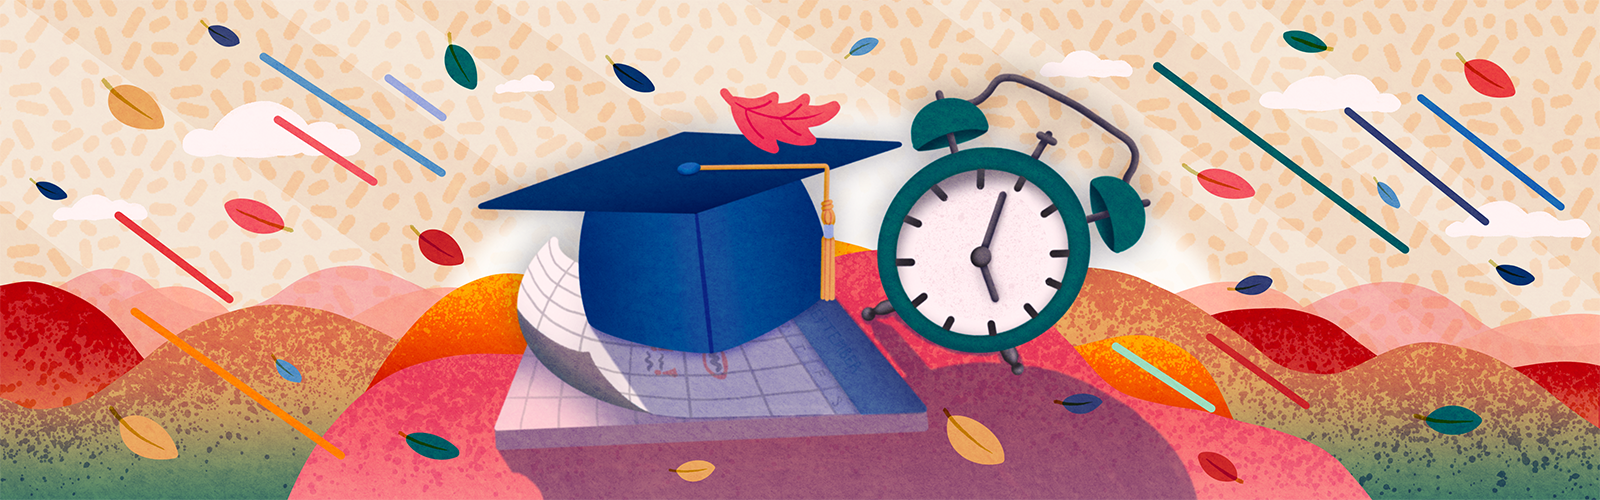 Graphic of a graduation cap, clock, and calendar with leaves blowing in the background